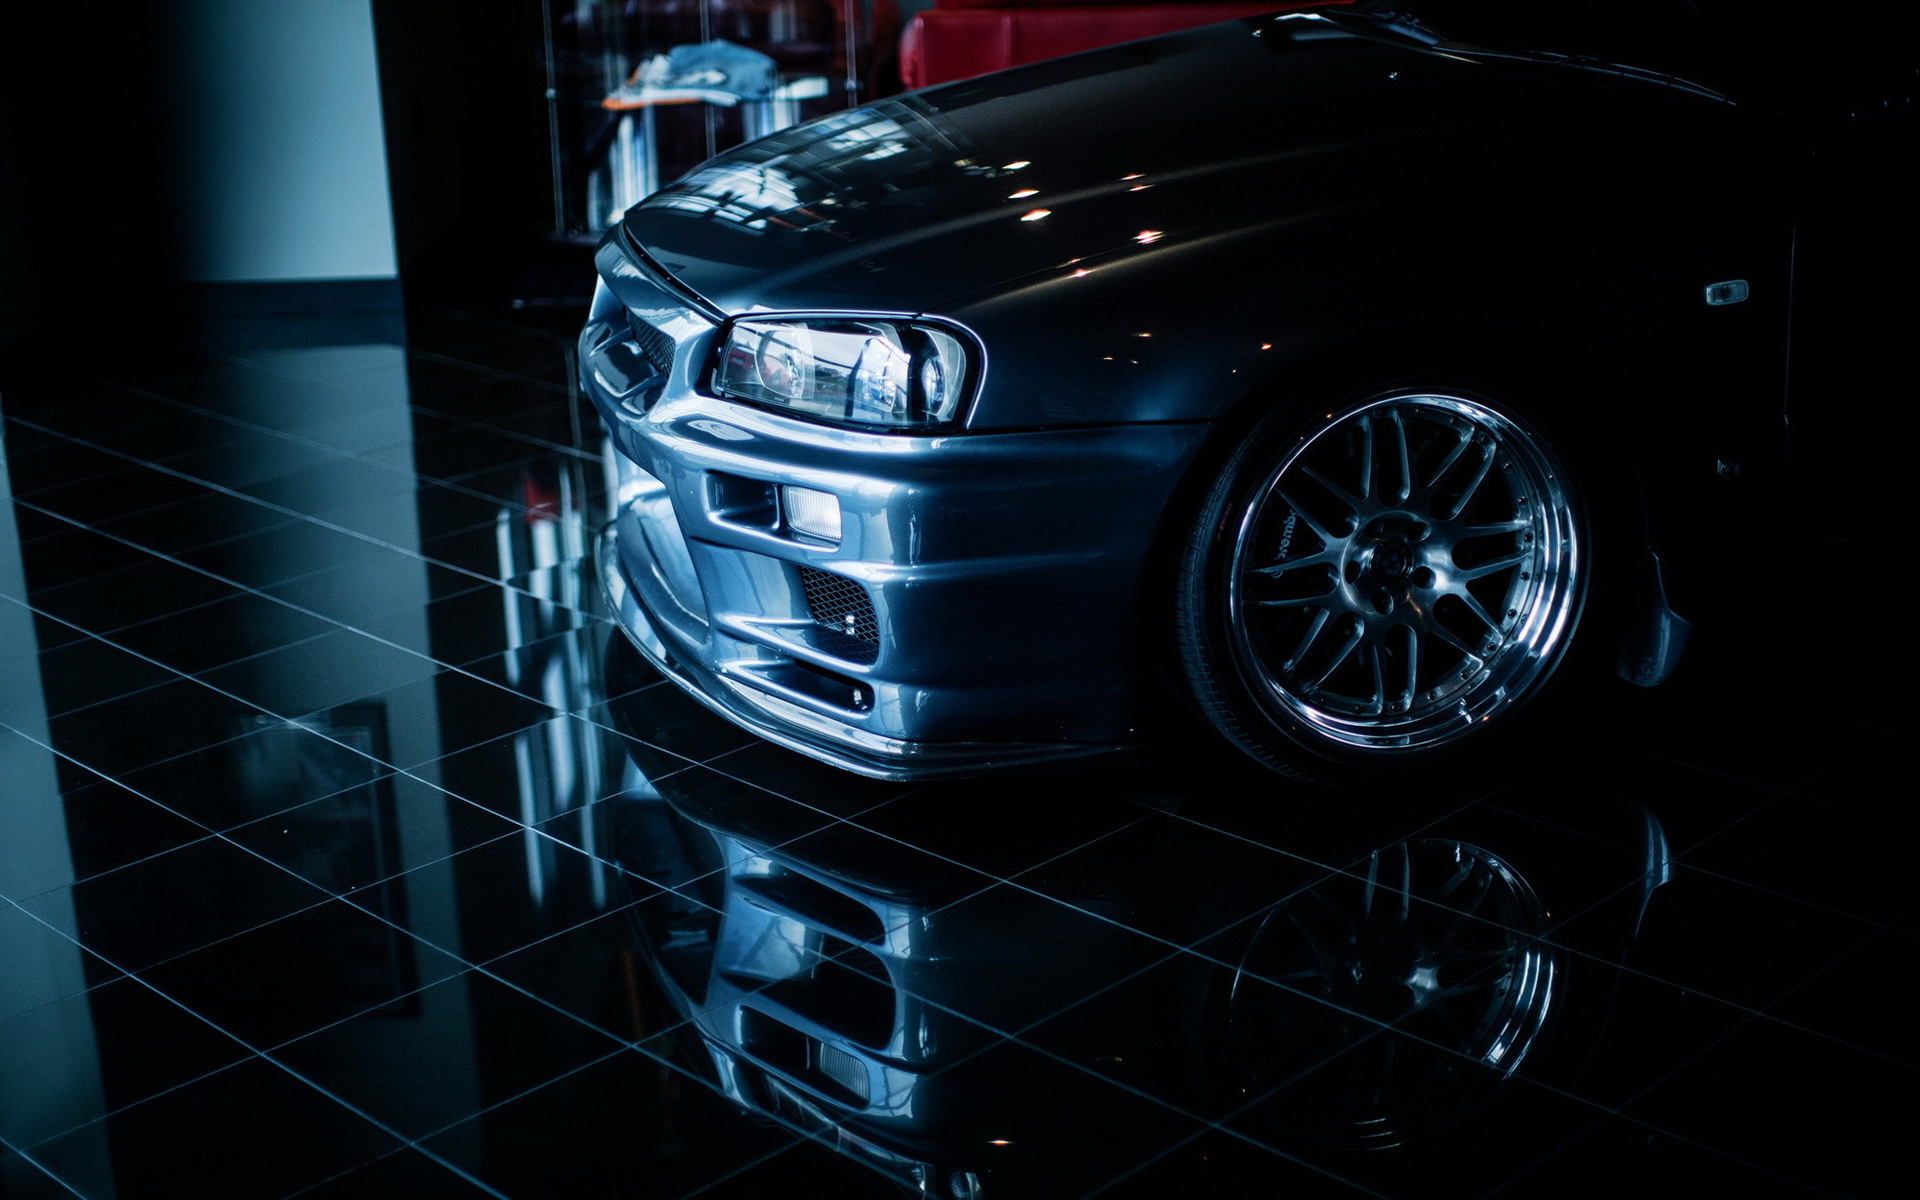 Free Download Nissan Skyline R34 Tuning Hd Wallpaper 19x10 For Your Desktop Mobile Tablet Explore 70 R34 Gtr Wallpaper Gtr R35 Wallpaper Hd Gtr Wallpaper Nissan Skyline Gtr Wallpaper Hd